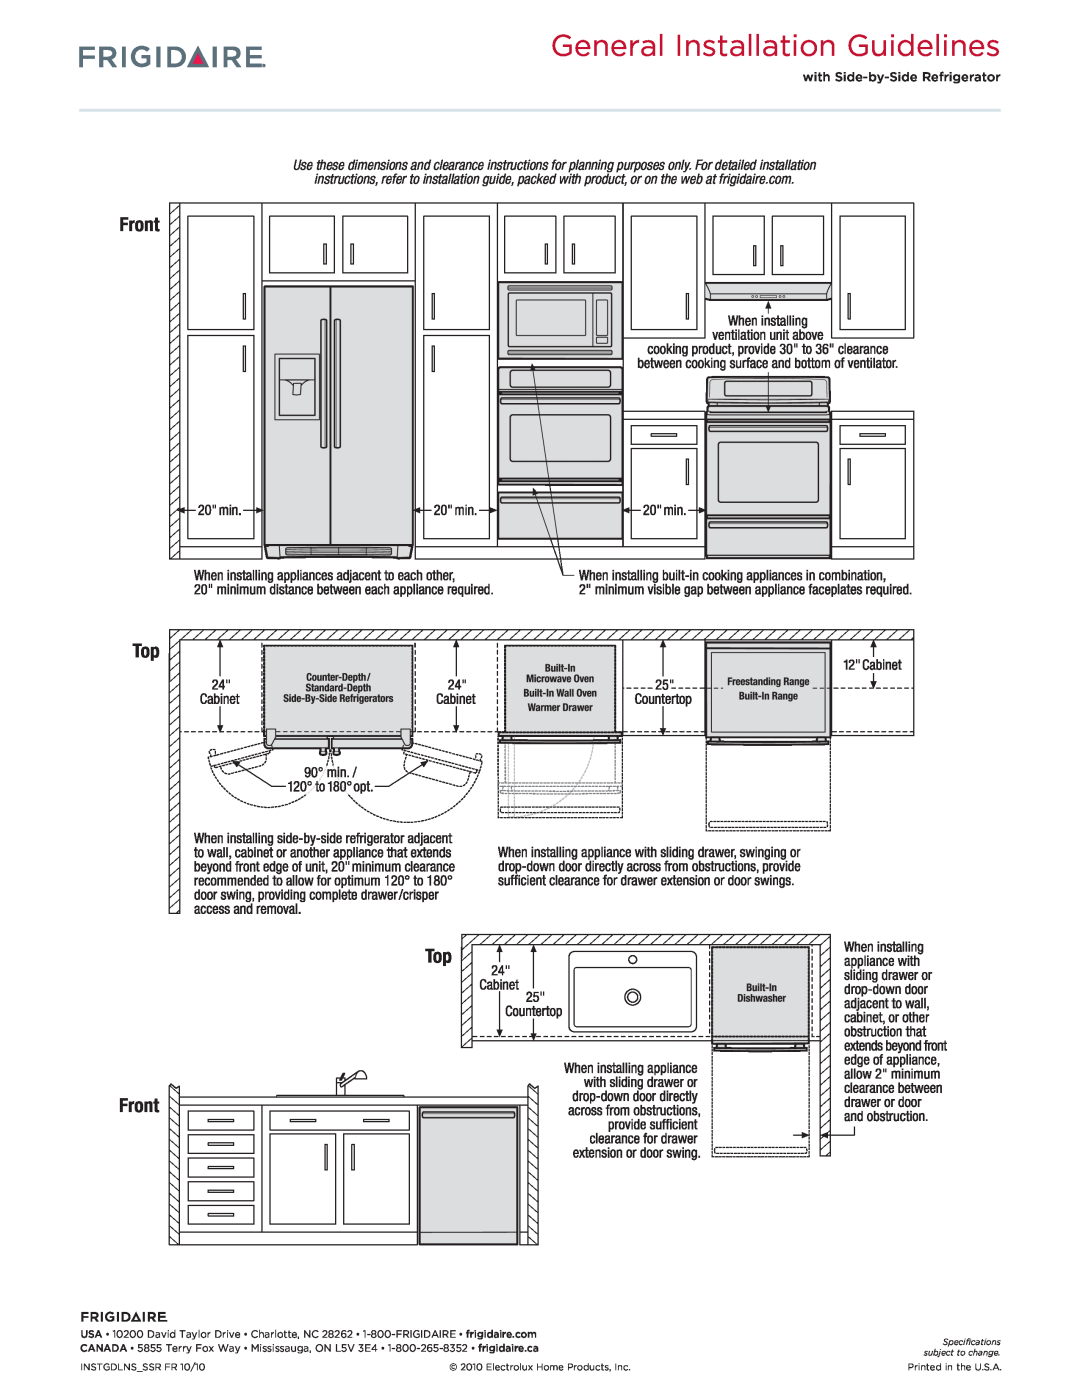 Frigidaire FGEF3031K dimensions General Installation Guidelines, Top Front 